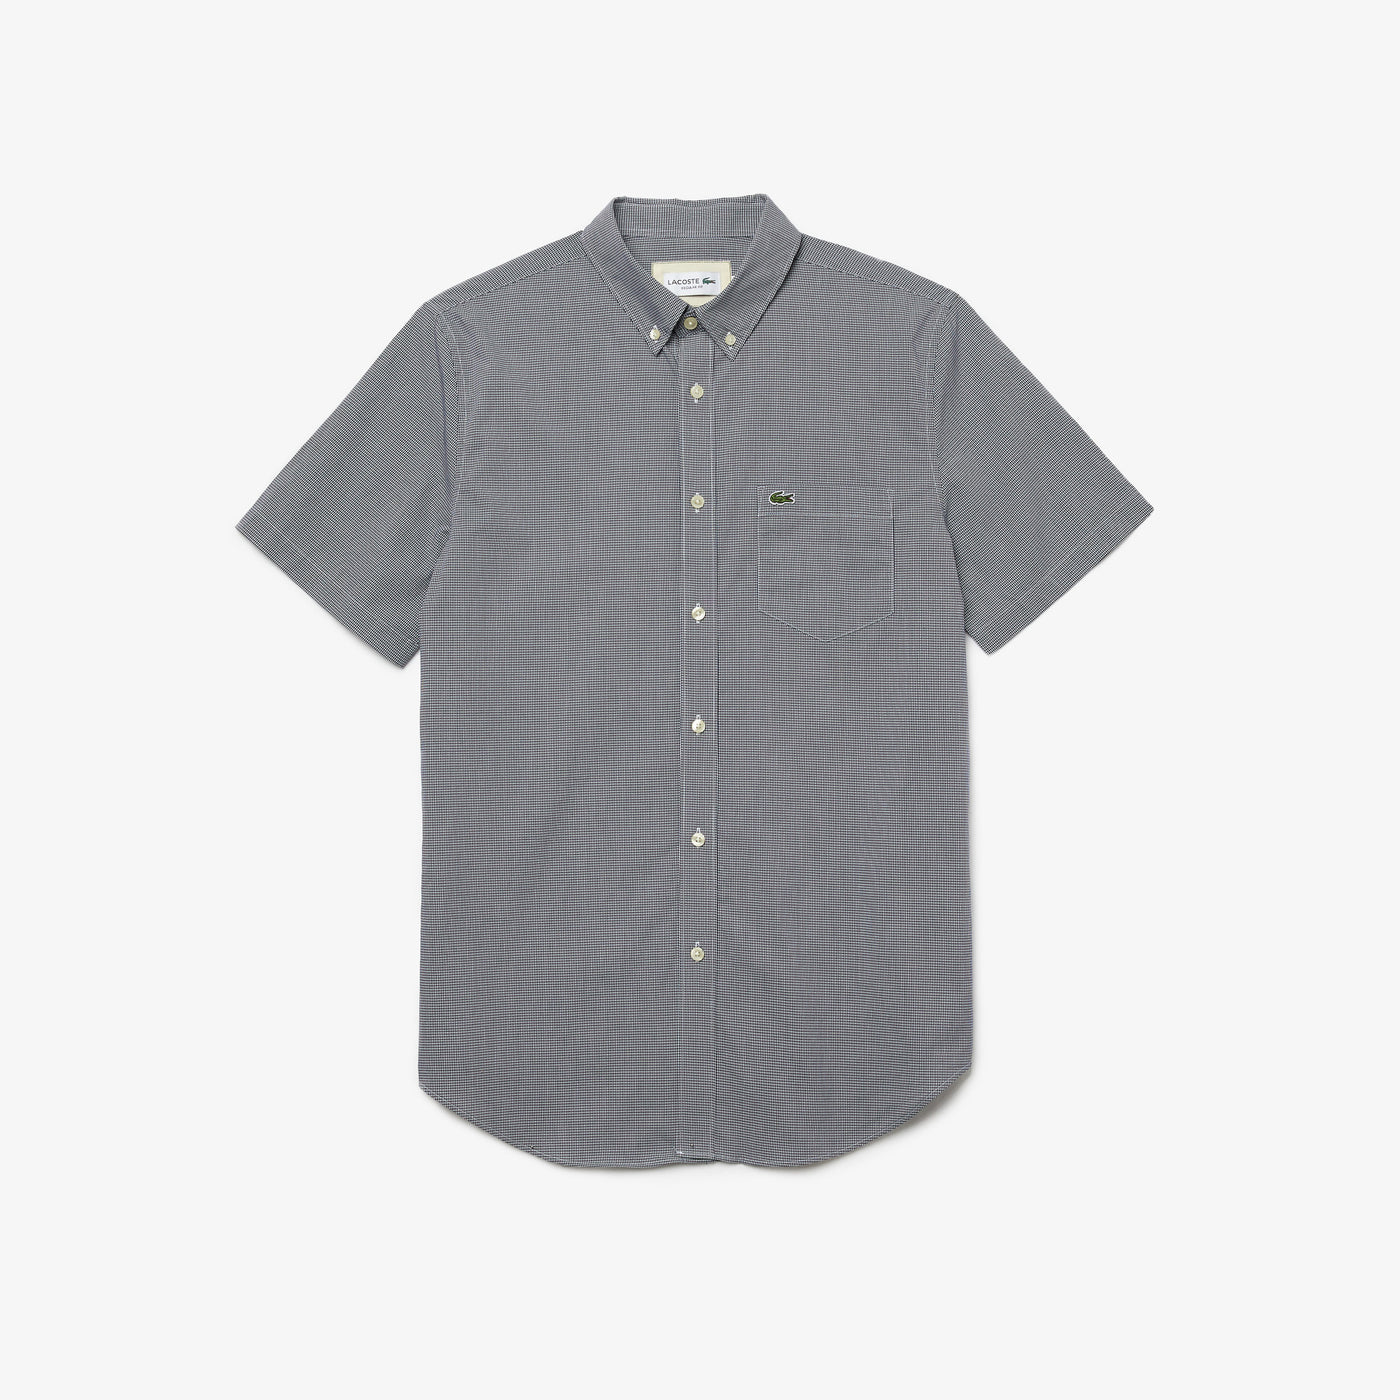 Shop The Latest Collection Of Lacoste Men'S Regular Fit Gingham Check Shirt - Ch2879 In Lebanon